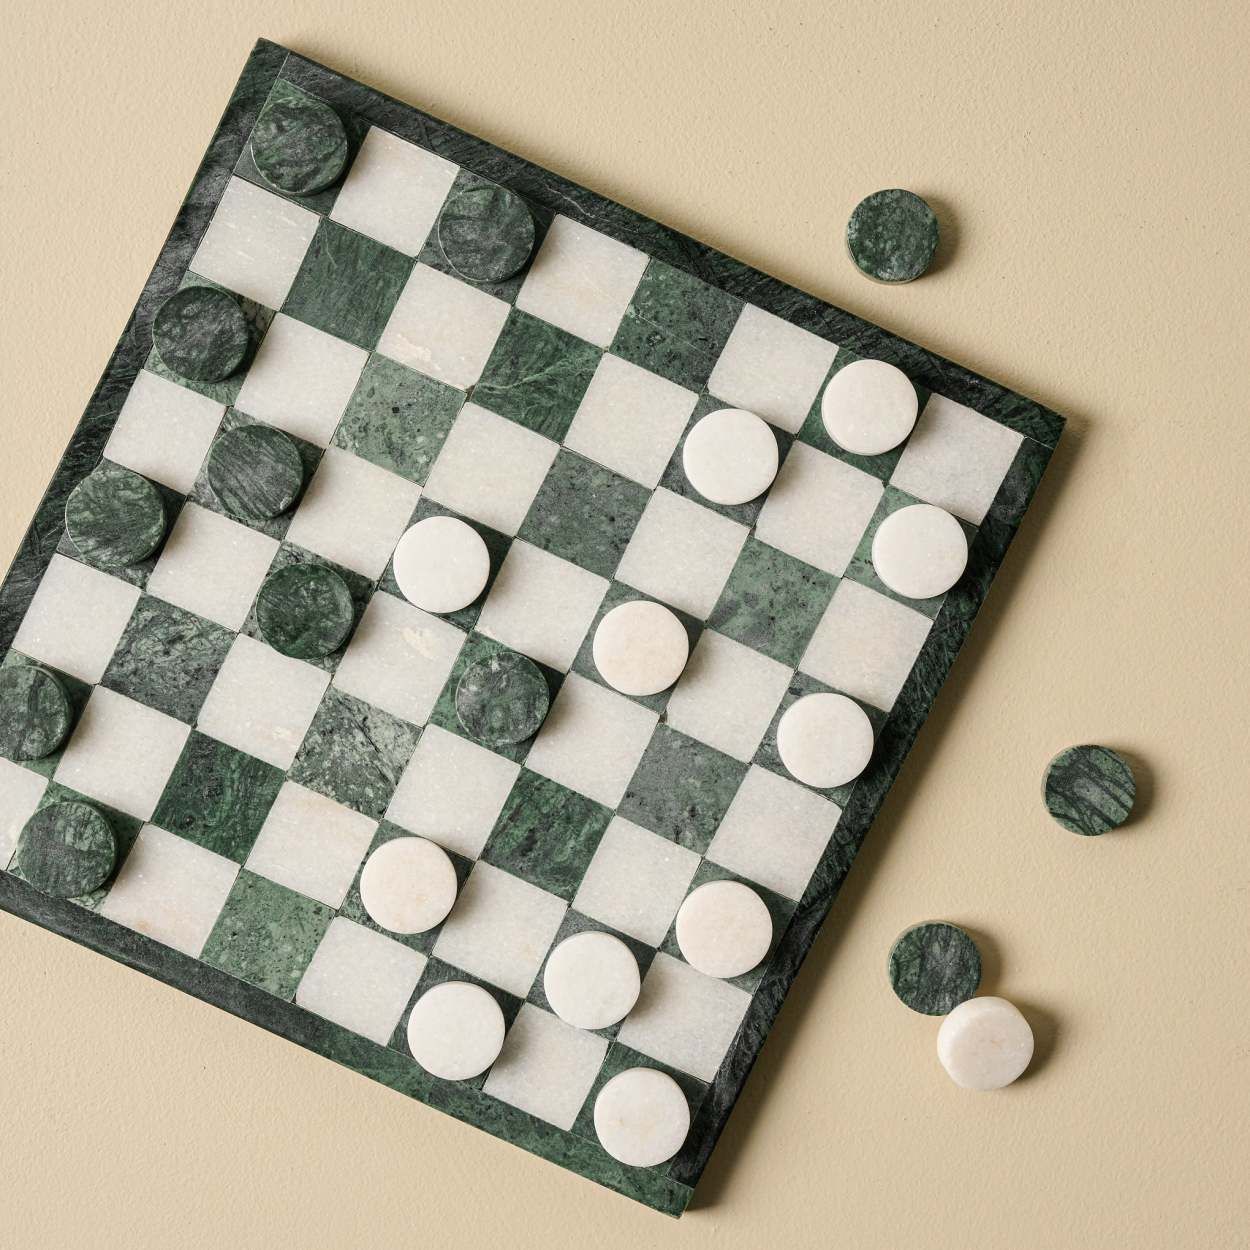 Green and White Marble Checkers Set | Magnolia